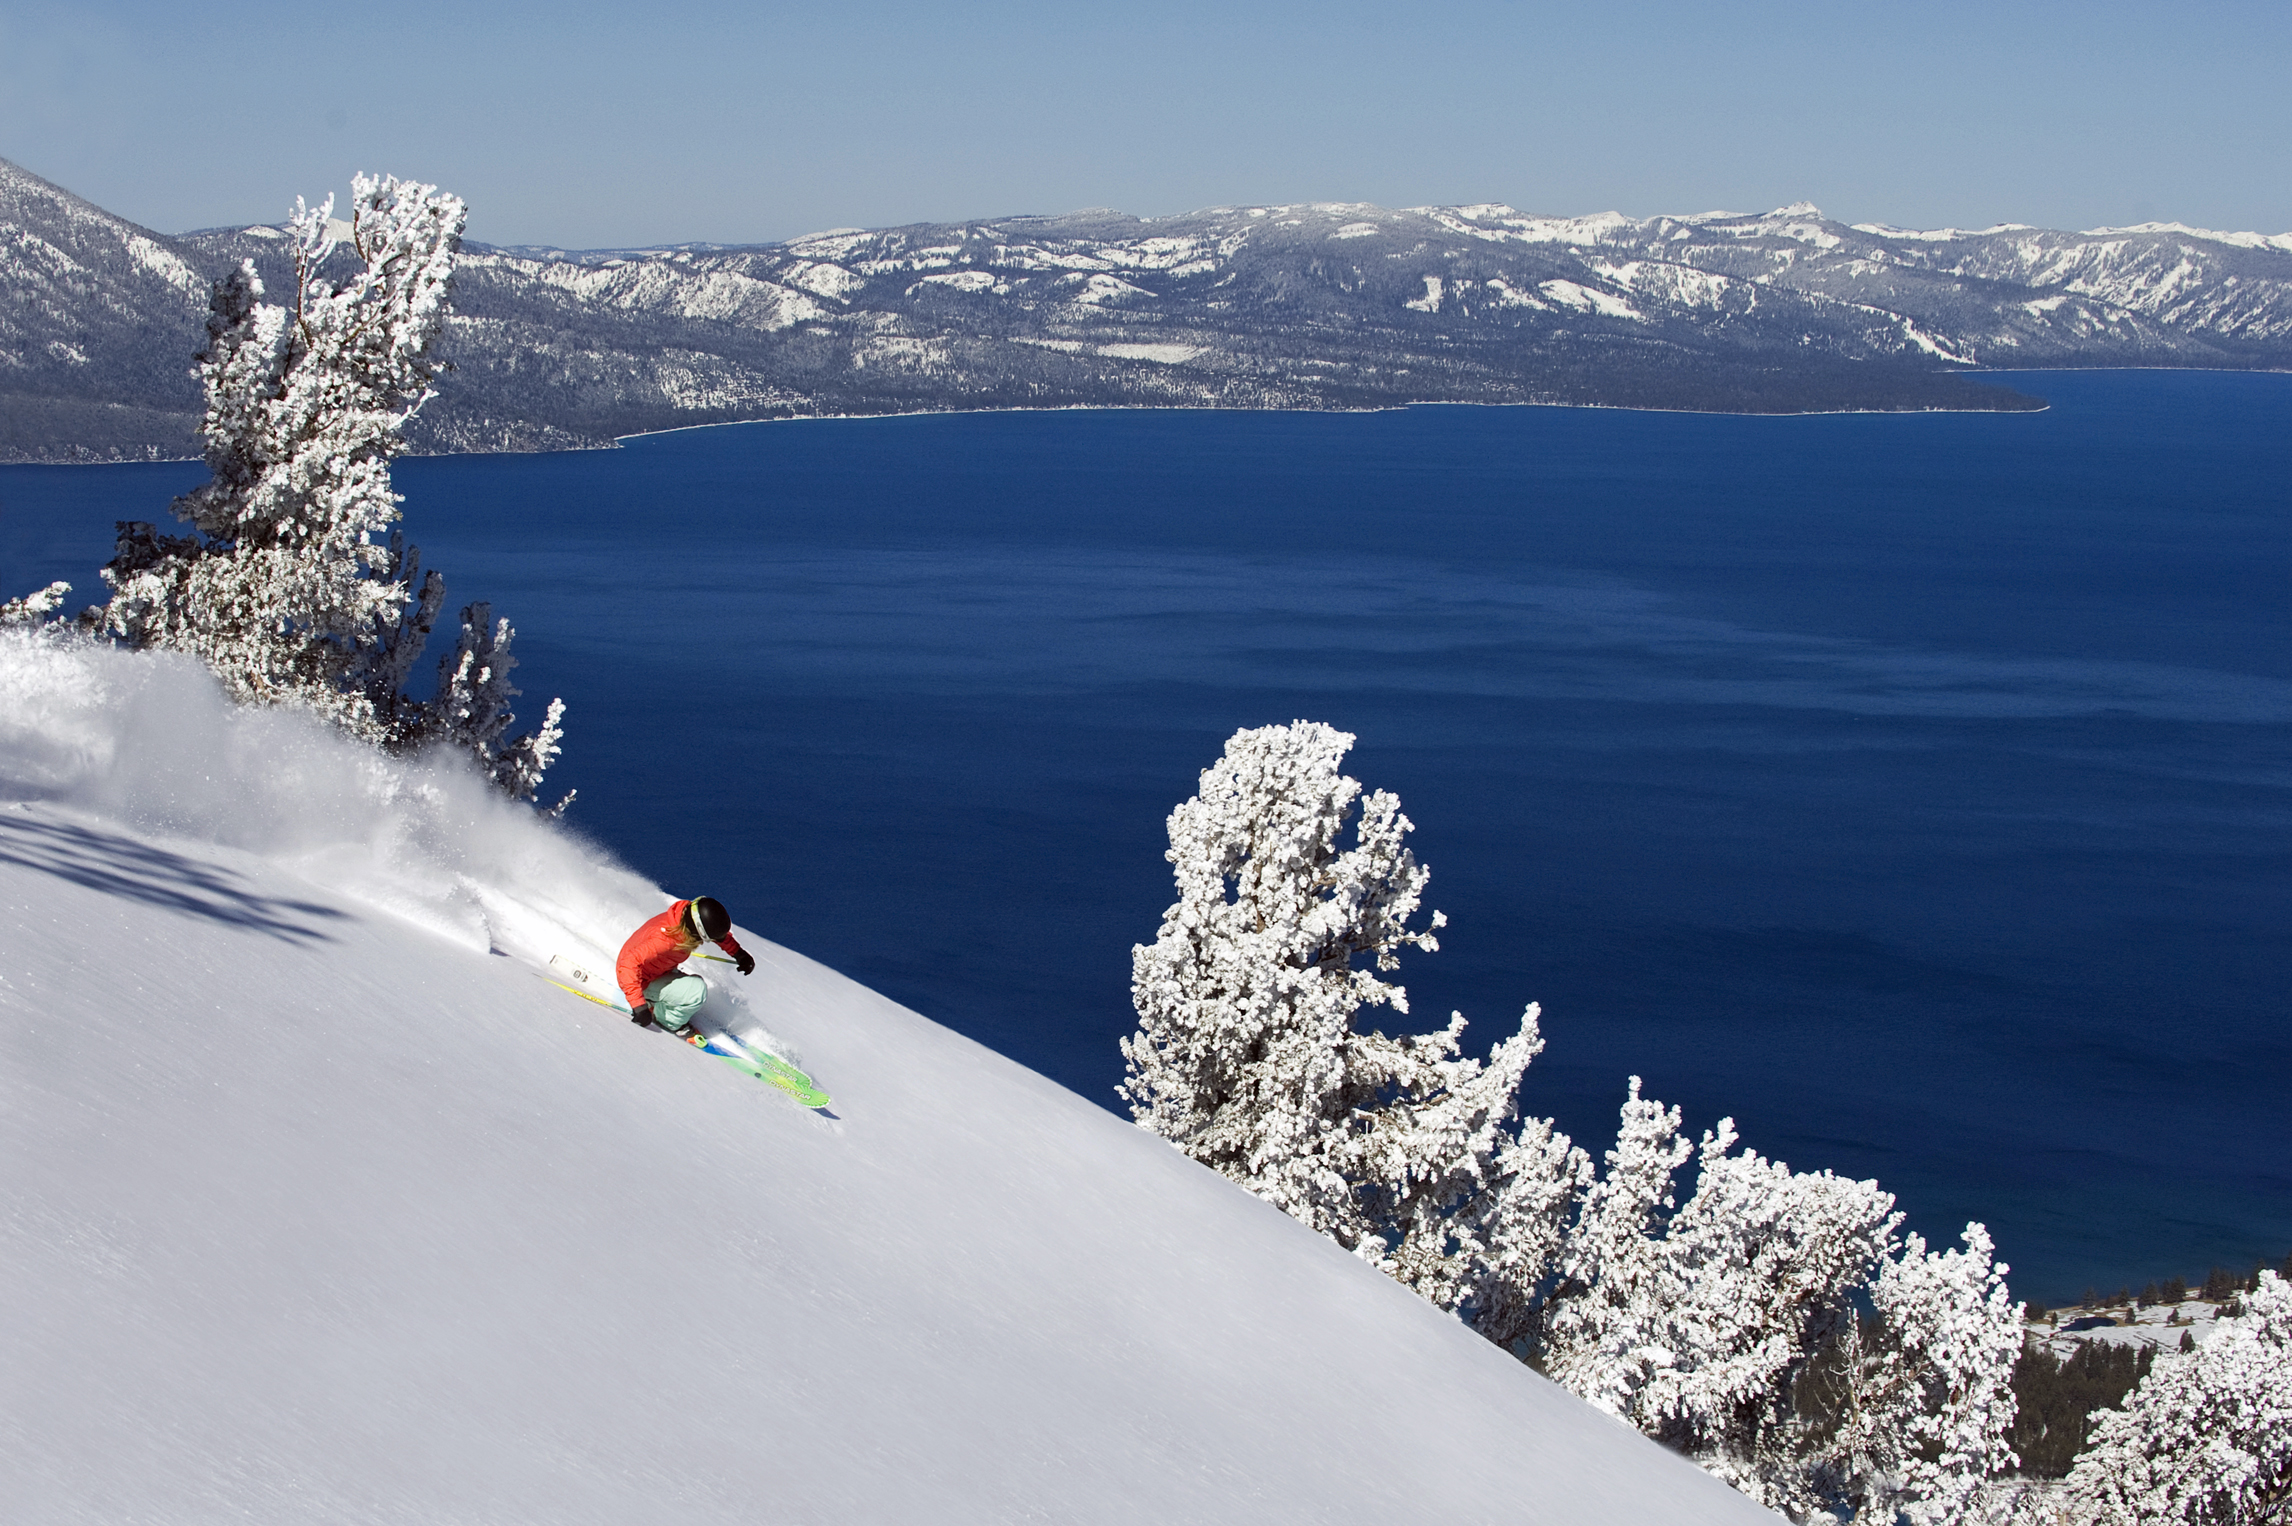 Perfect for a Tahoe ski getaway, The Landing Resort & Spa is just blocks from the gondola for the Heavenly ski area, known for its remarkable lake views (photo courtesy of Heavenly Mountain Resort).